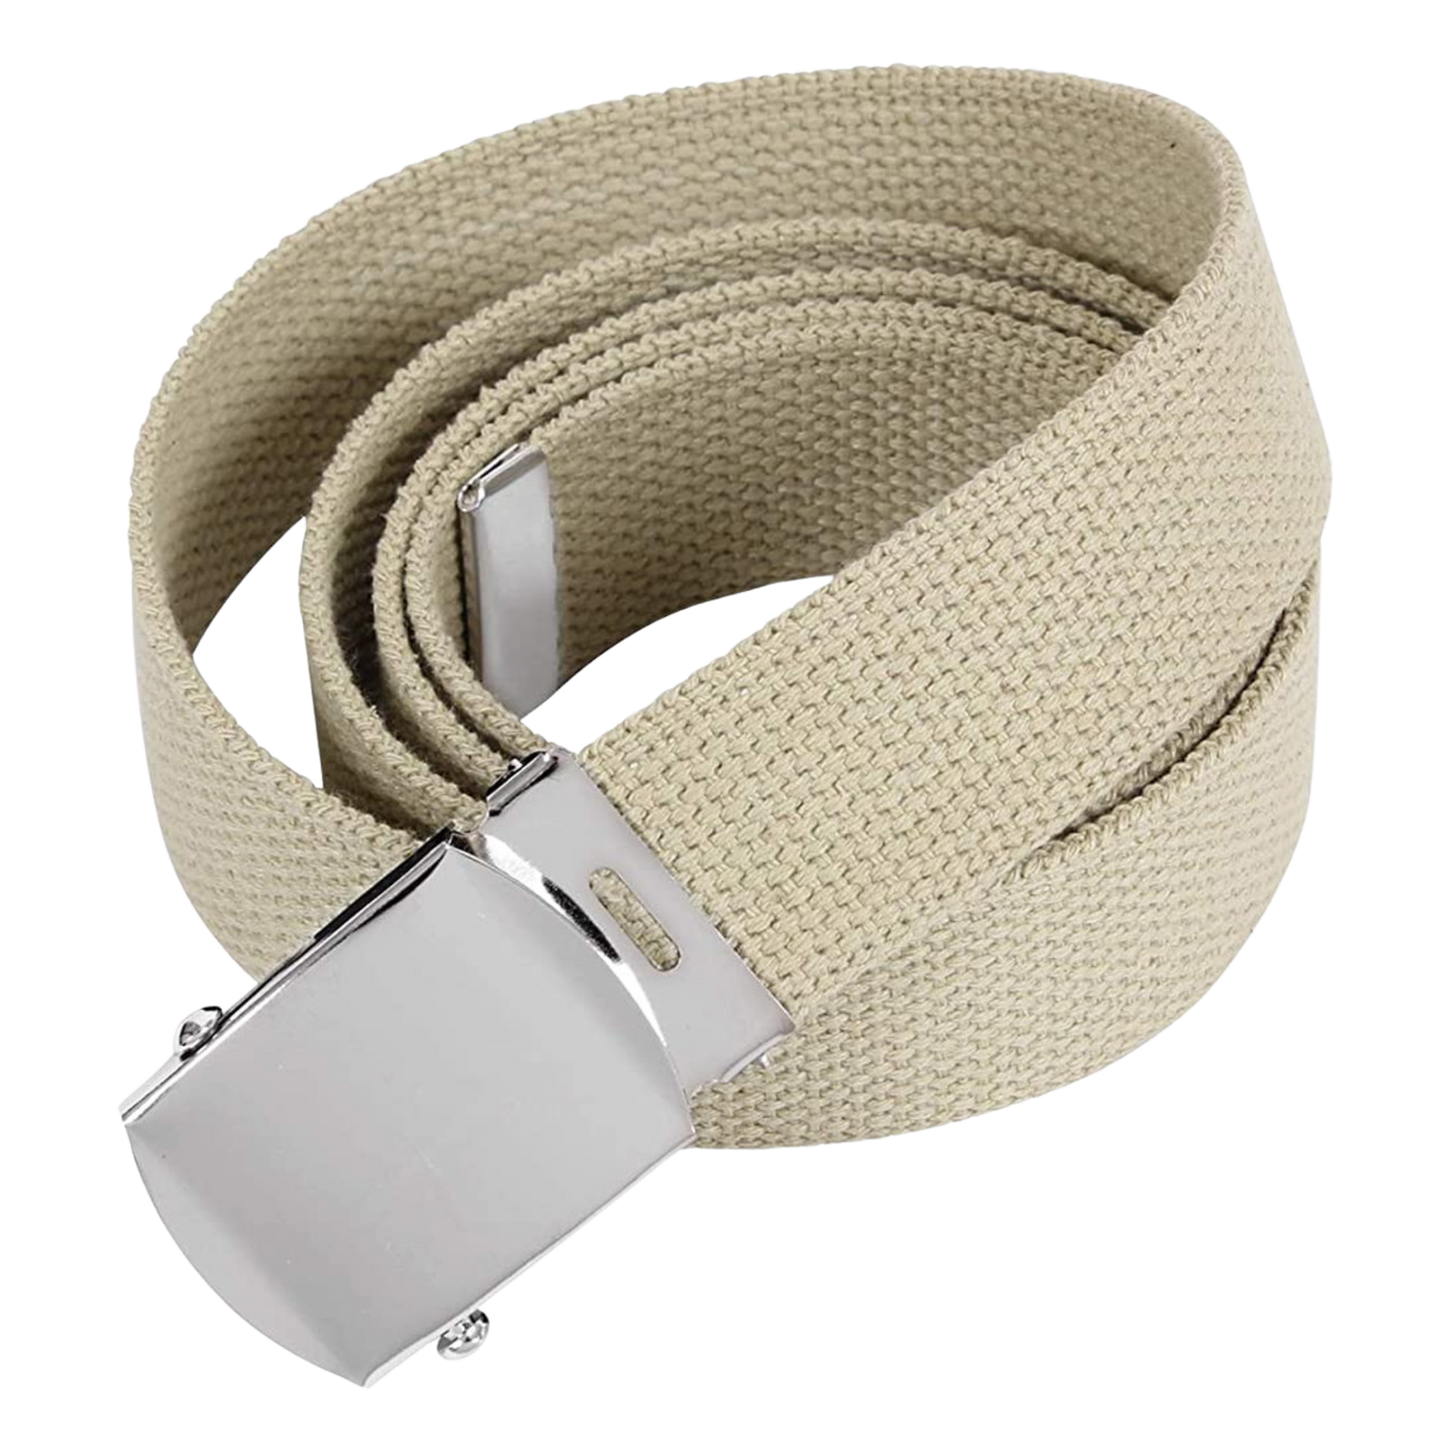 Rothco Web Belt 54 inches long